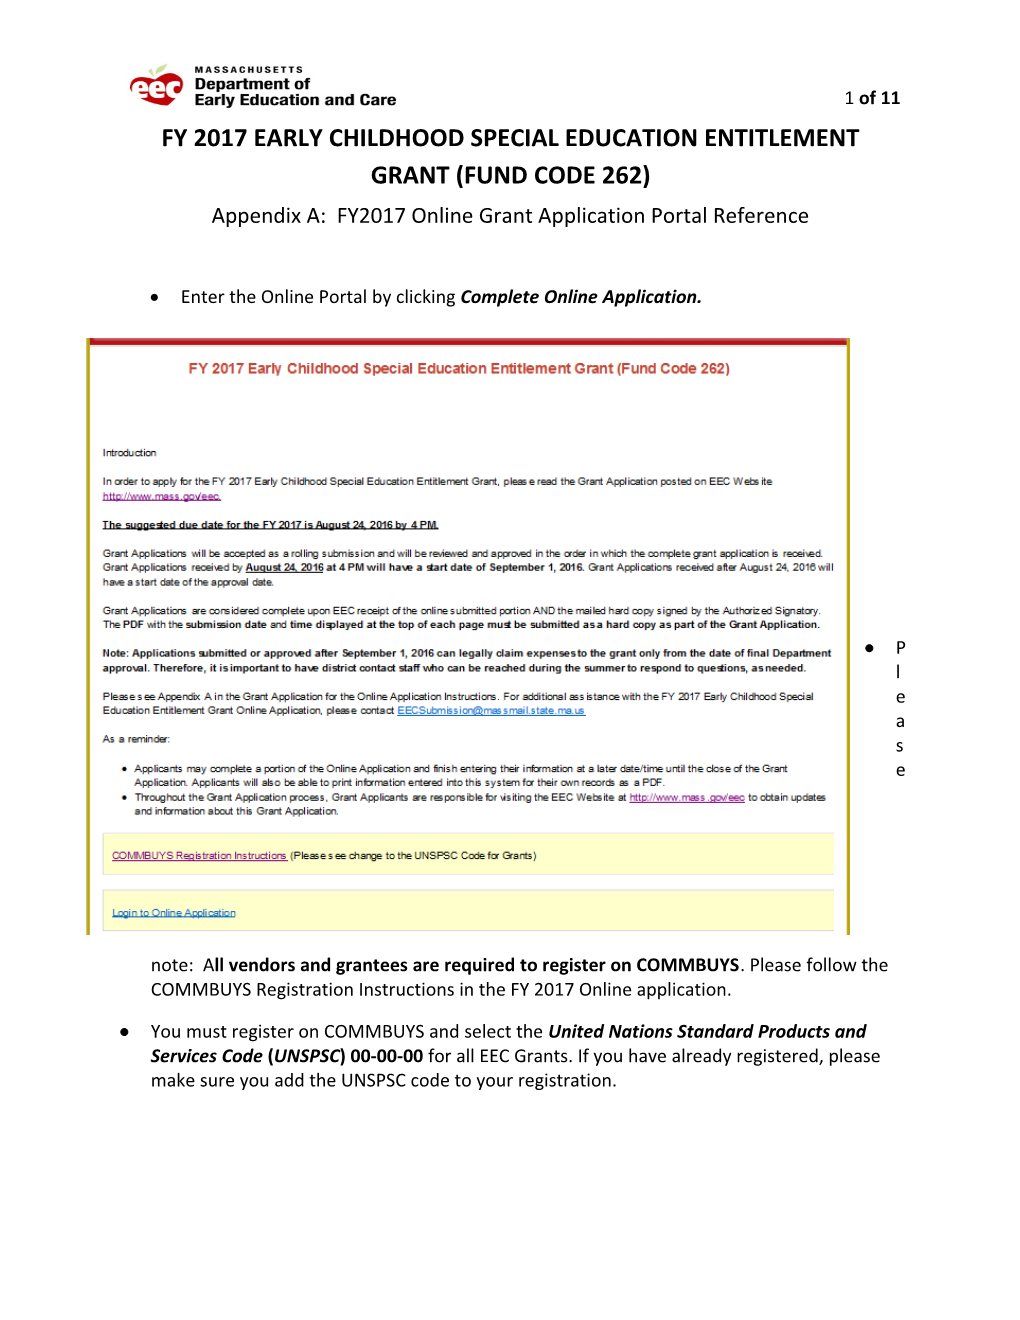 Fy 2017 Early Childhood Special Education Entitlement Grant (Fund Code 262)